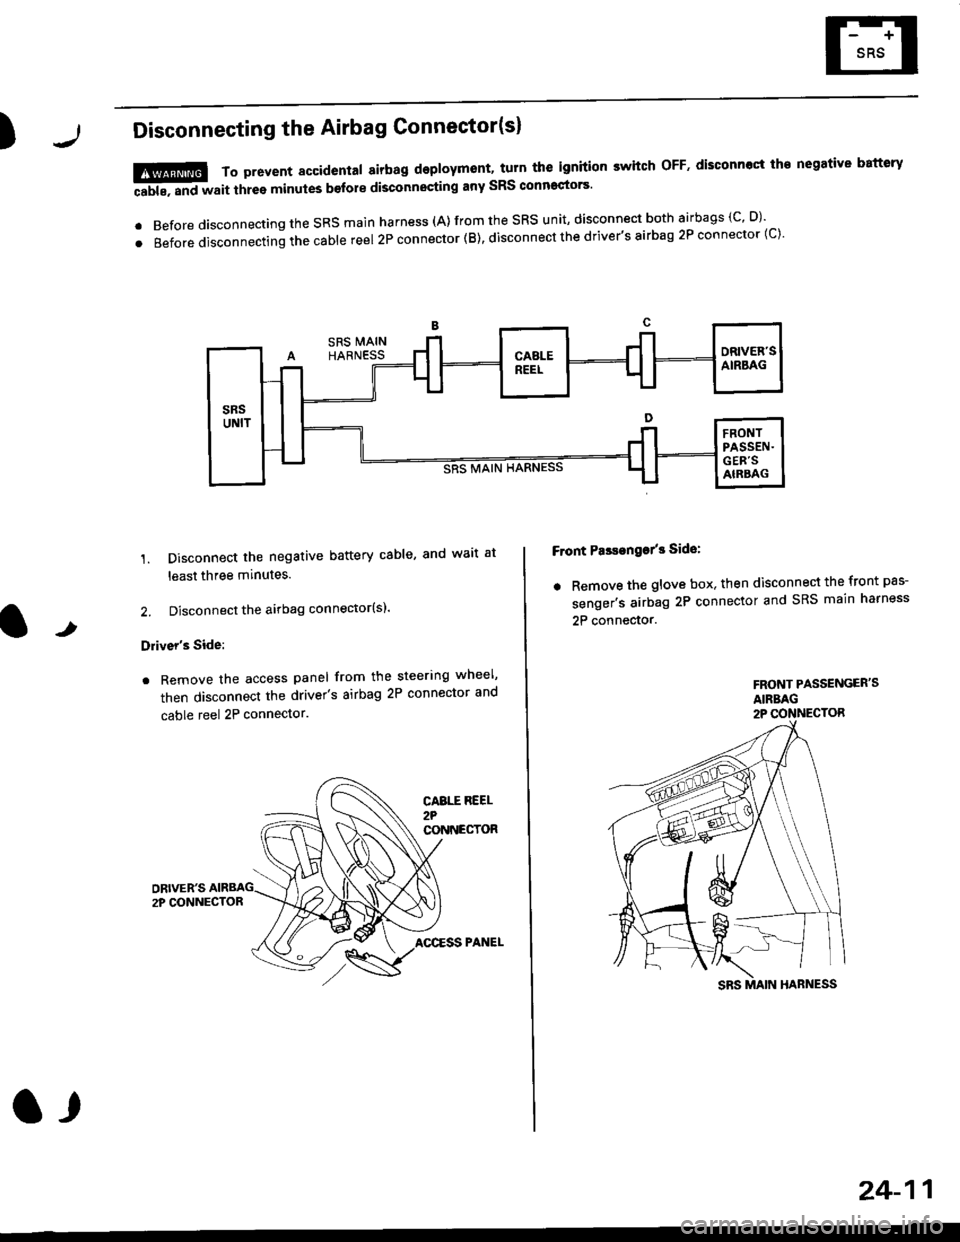 HONDA CIVIC 1996 6.G Workshop Manual )Disconnecting the Airbag Connector(sl
1. Disconnect the negative battery cable, and wait at
least three minutes.
2. Disconnect the airbag connector(sl.
Drivers Side:
. Remove the access panel from 